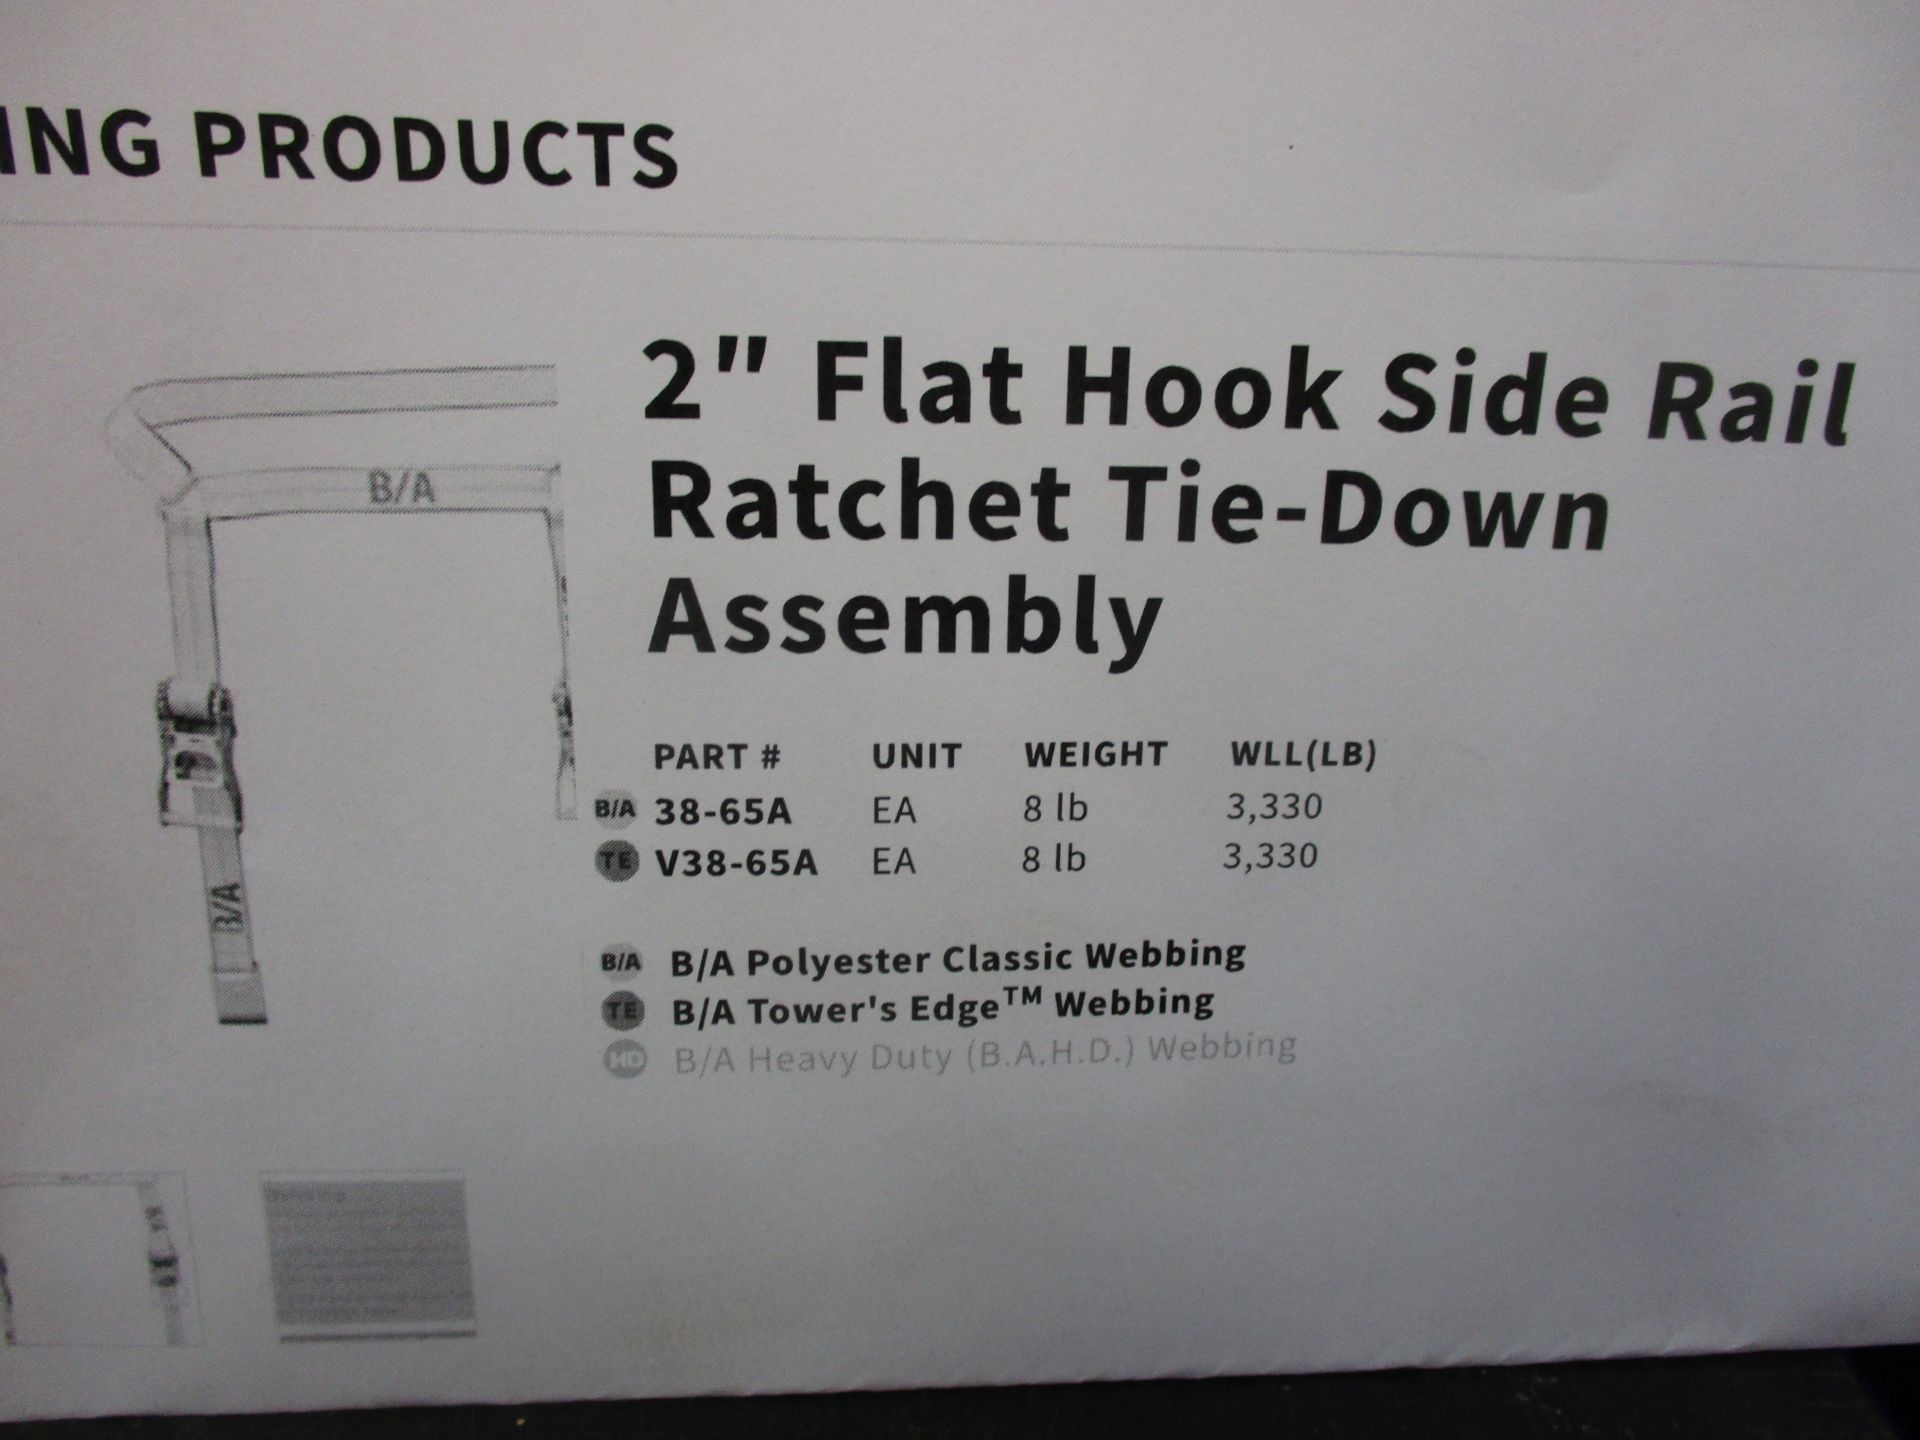 4PC B/A TOWING PRODUCTS 2" FLAT HOOK SIDE RAIL RATCHET TIE DOWN ASSEMBLY - Image 2 of 2